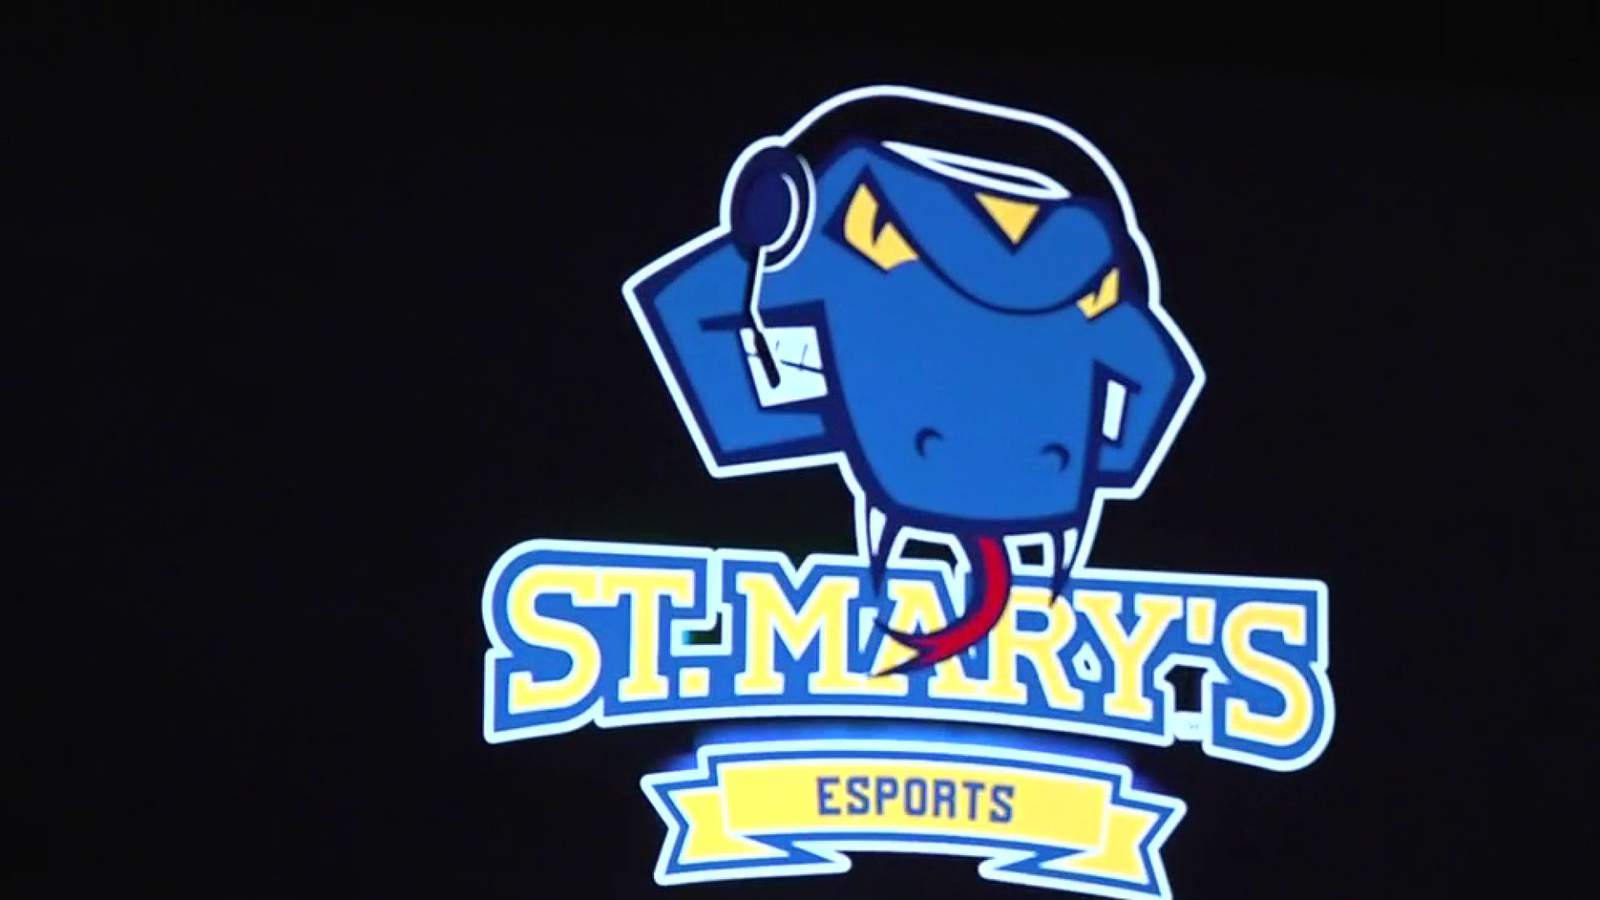 'Esports is built on community’: St. Mary’s University hopes to create more diversity in competitive gaming program